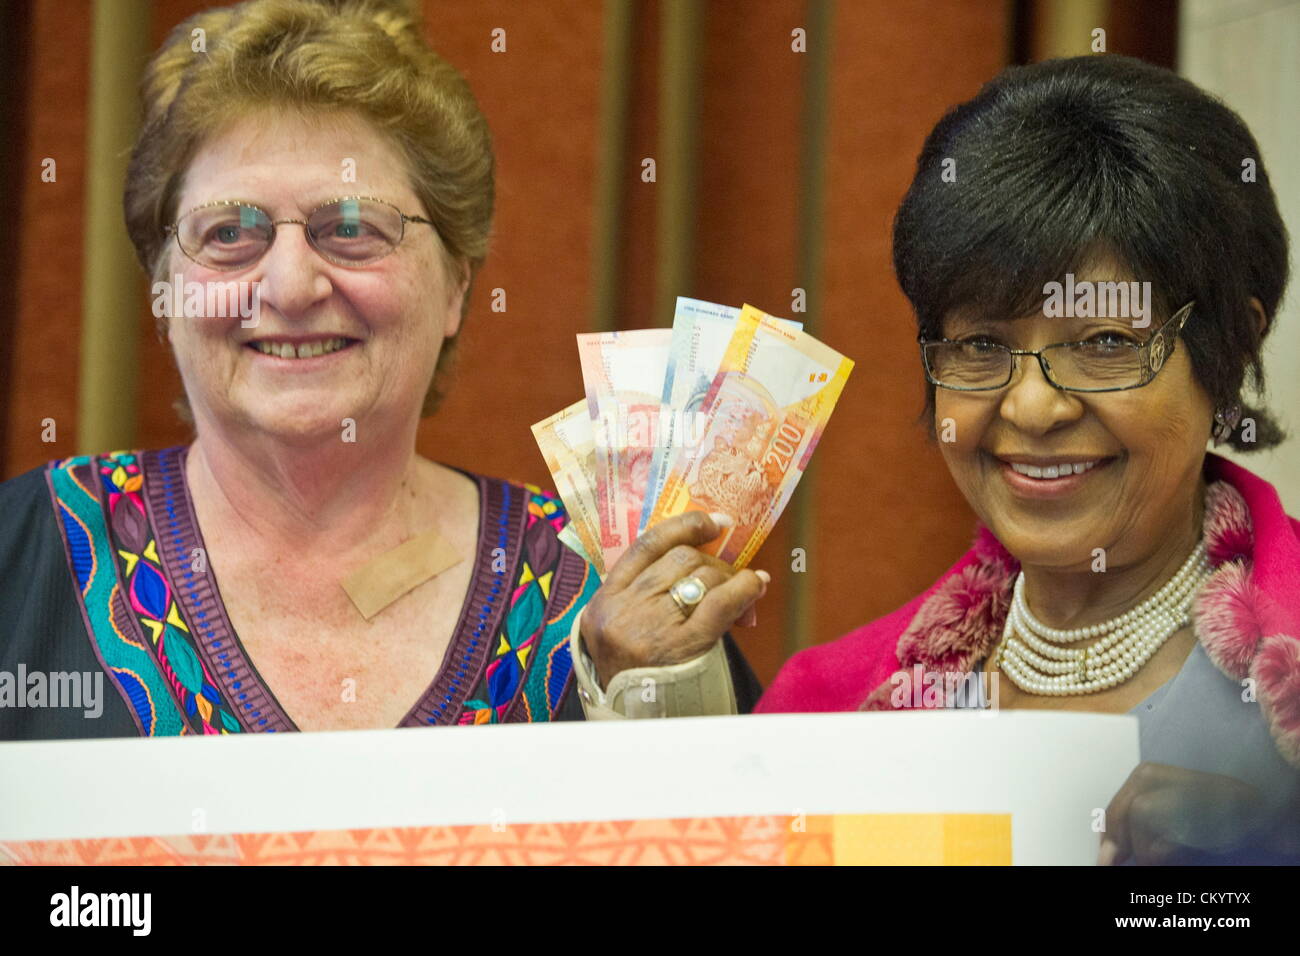 Pretoria, South Africa, 5th September 2012. Winnie Madikizela-Mandela and Reserve Bank Governor Gill Marcus during the launch of a national communication campaign to introduce a range of new banknotes honouring former President Nelson Mandela on September 5, 2012 in Pretoria, South Africa. The new notes will show Mandela’s face on the front and the Big Five on the back. (Photo by Gallo Images / Foto24 / Craig Nieuwenhuizen/Alamy Live News) Stock Photo